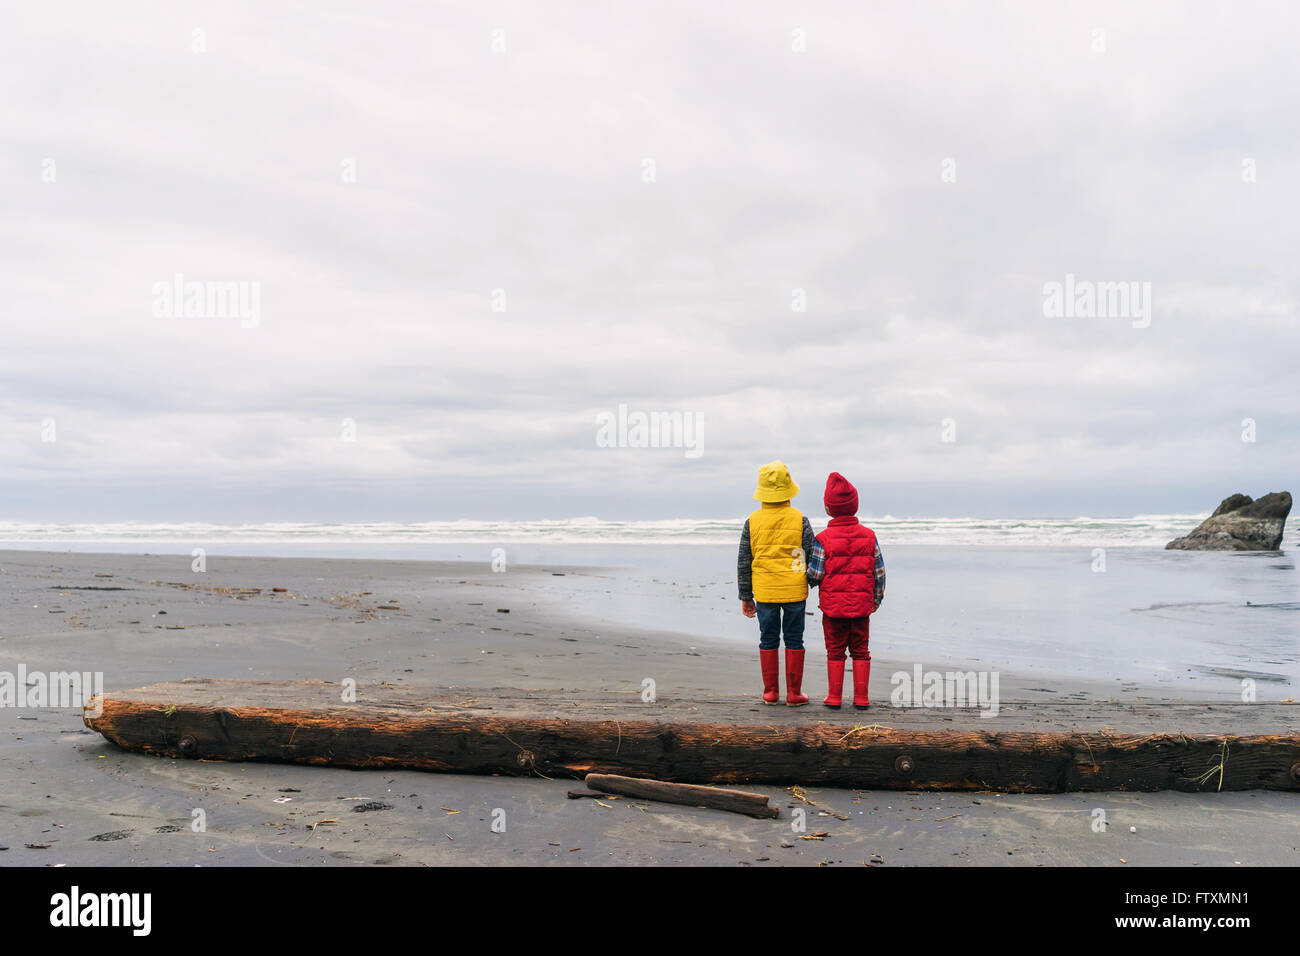 Two boys standing on beach arm in arm Stock Photo